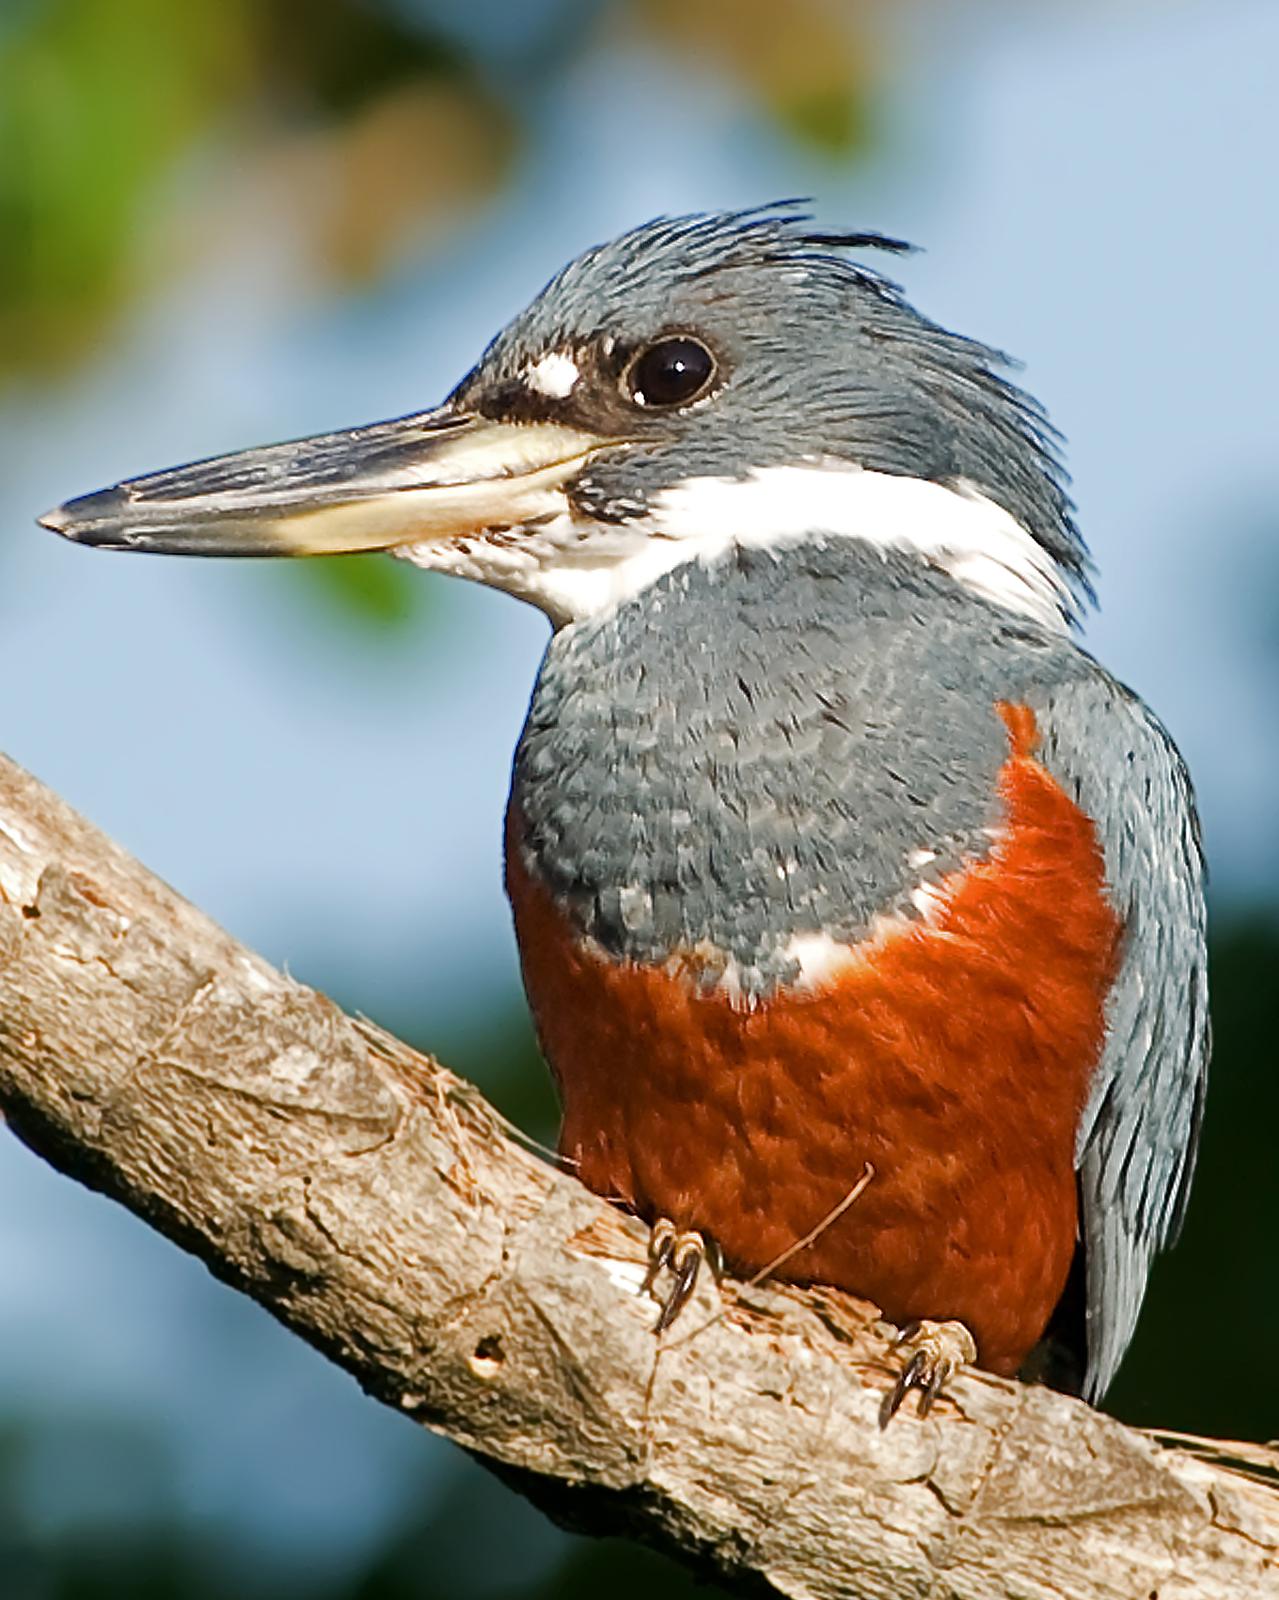 Ringed Kingfisher Photo by Alex Vargas